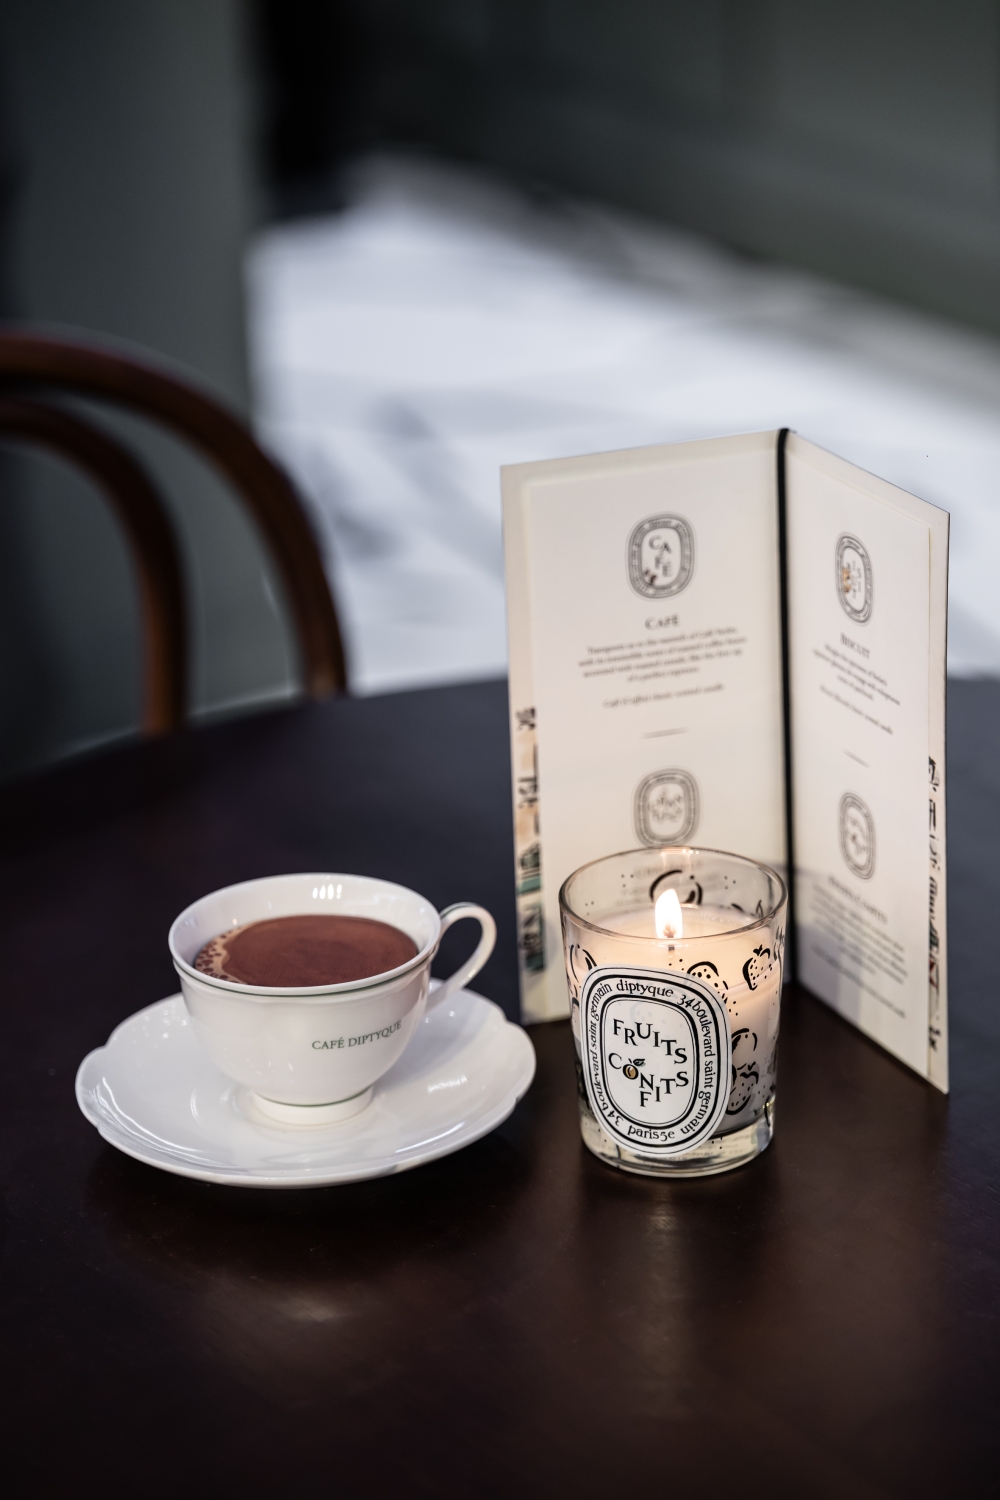 The new candle from Diptyque is inspired by sweet delights. — Picture courtesy of Kens Apothecary